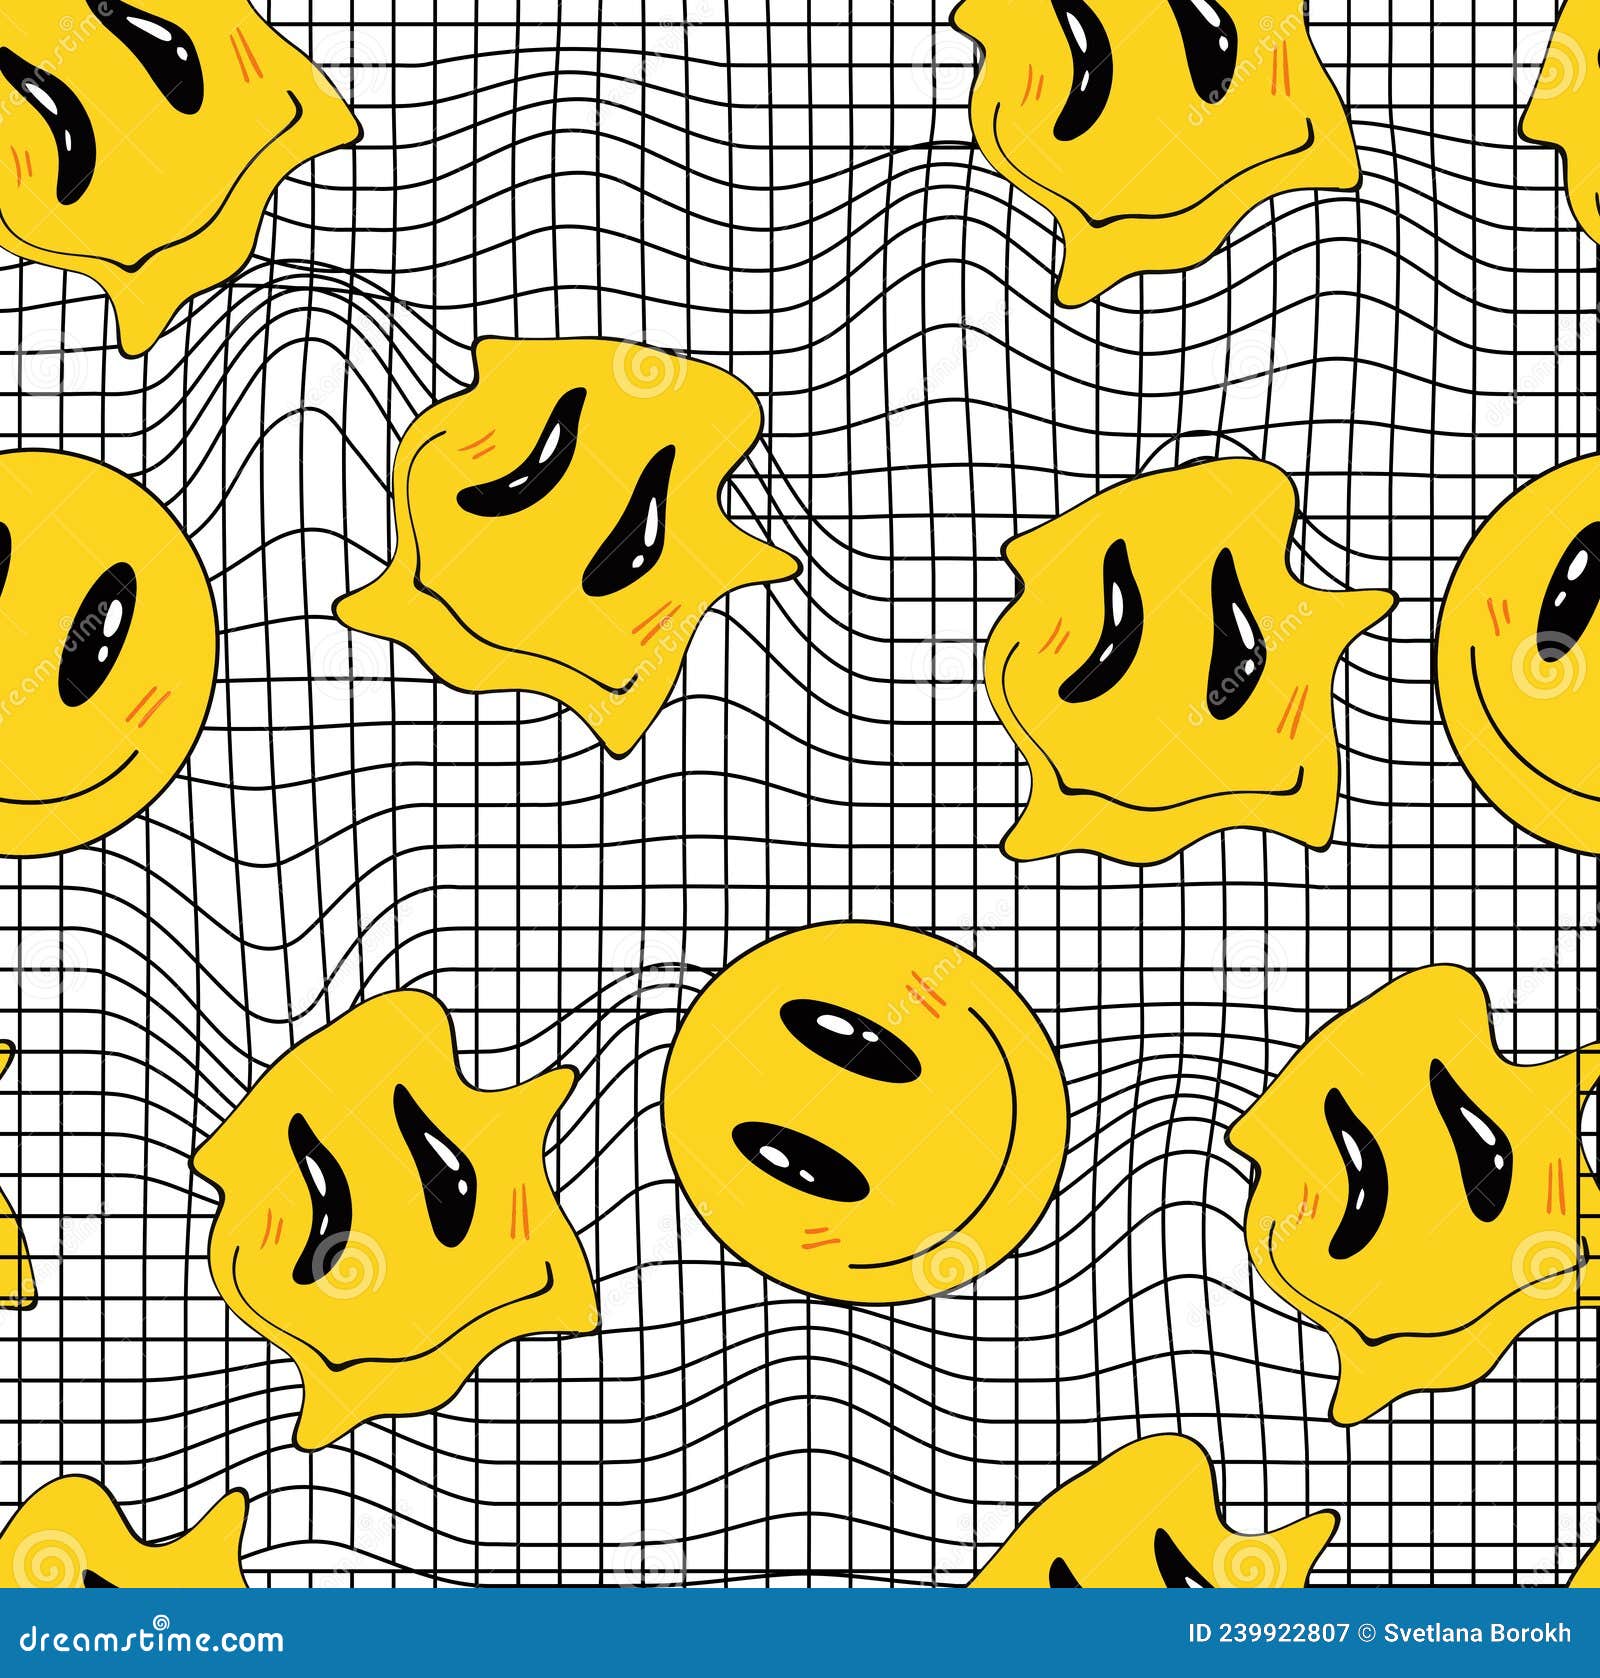 Seamless Yellow Distorted Melting Smiley Face Illustration Pattern For Fabric Wallpaper Or Wrapping Paper Vector Stock Vector Illustration Of Face Expression